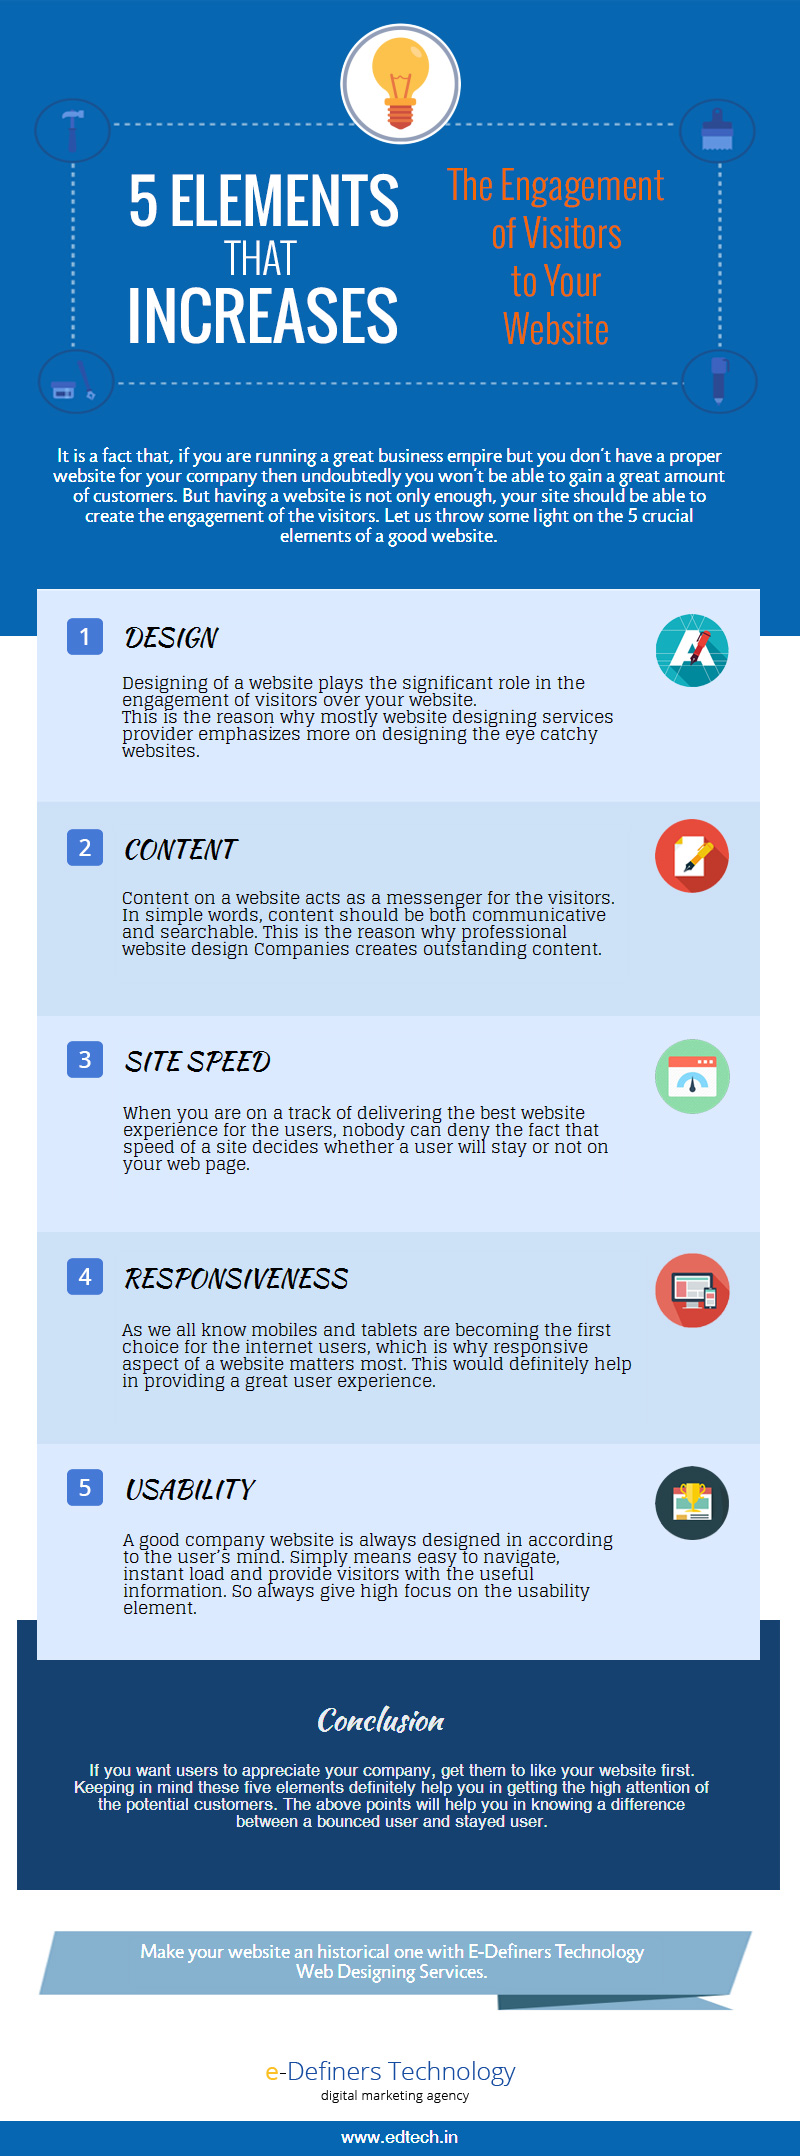 5-elements-that-increases-the-engagement-of-visitors-to-your-website